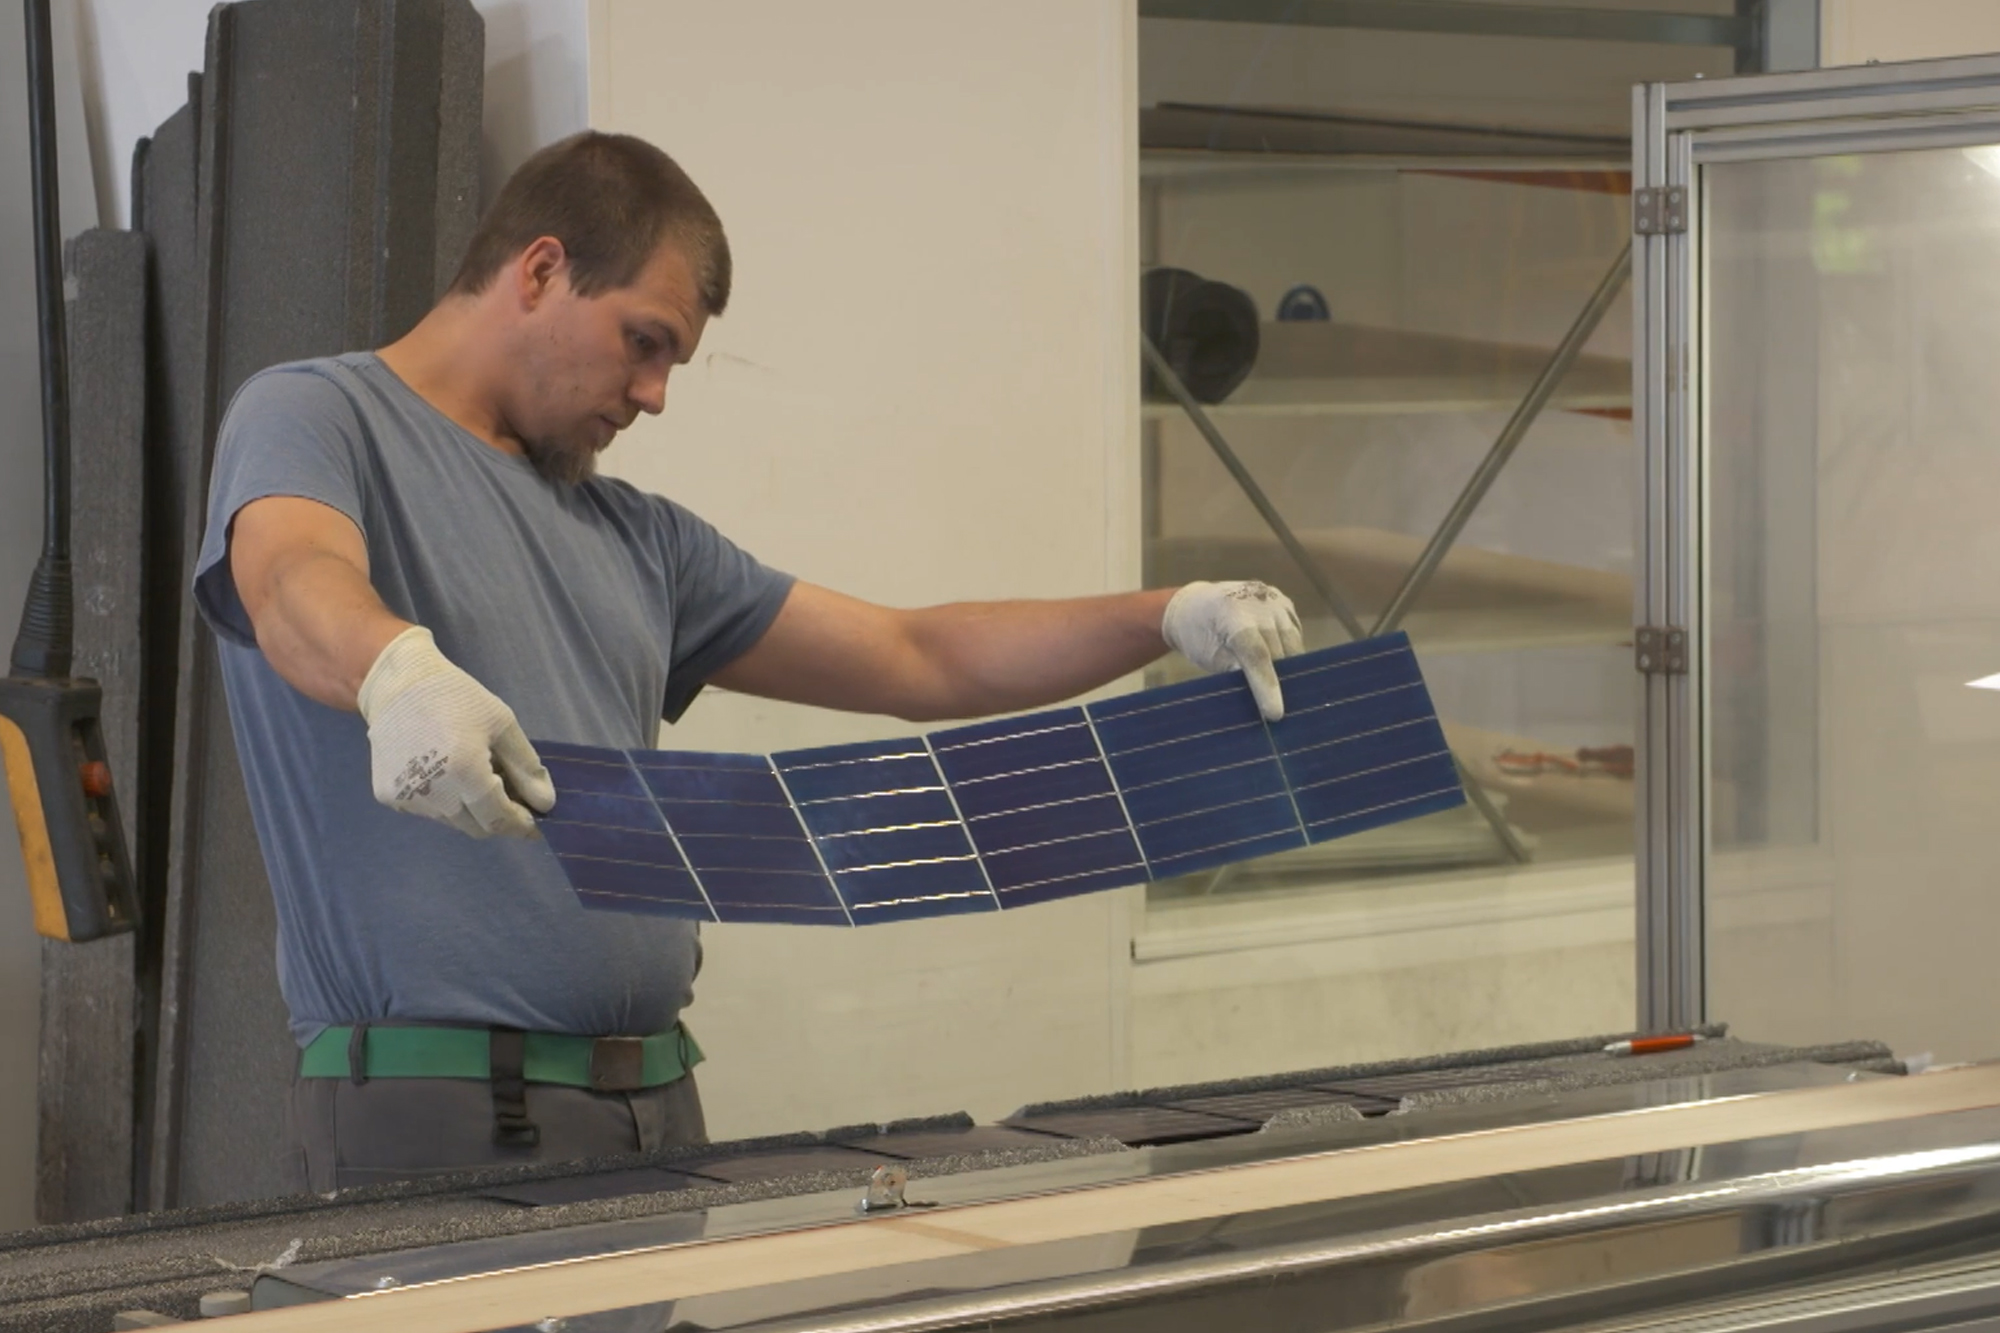 Mondragon Assembly has been chosen to supply a solar module production line to the Netherlands